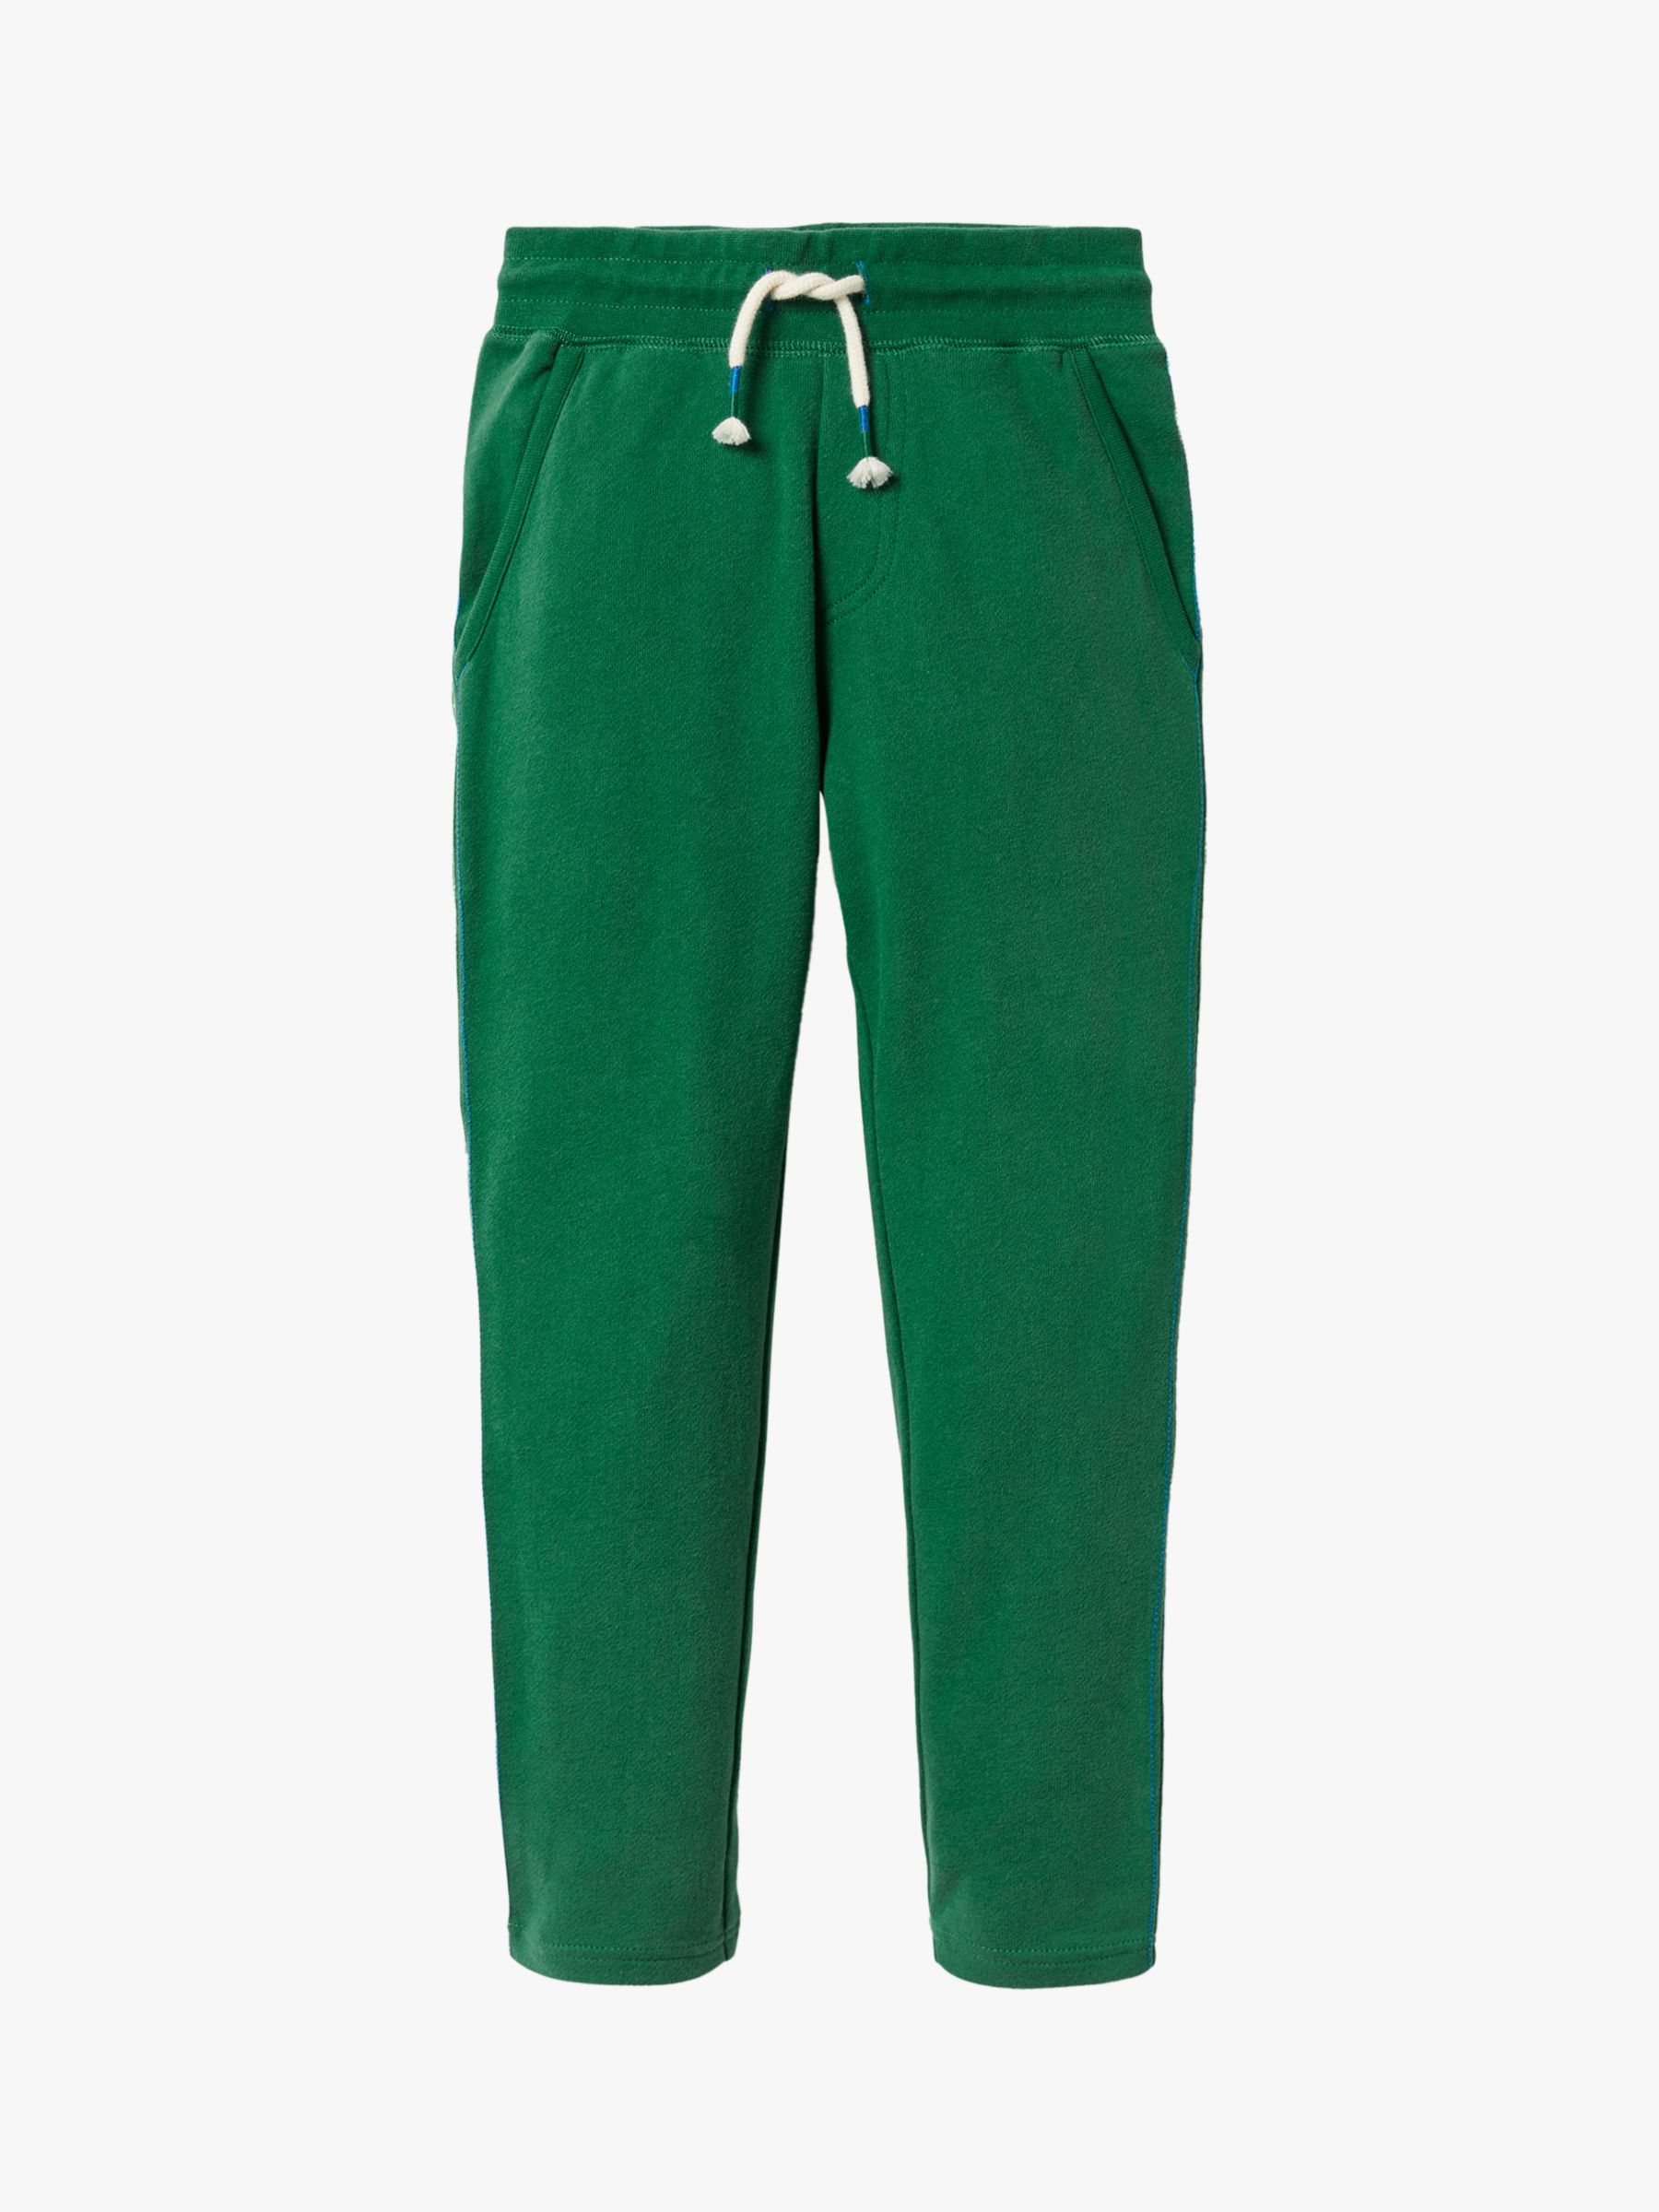 Mini Boden Kids' Essential Joggers, Forest Green at John Lewis & Partners